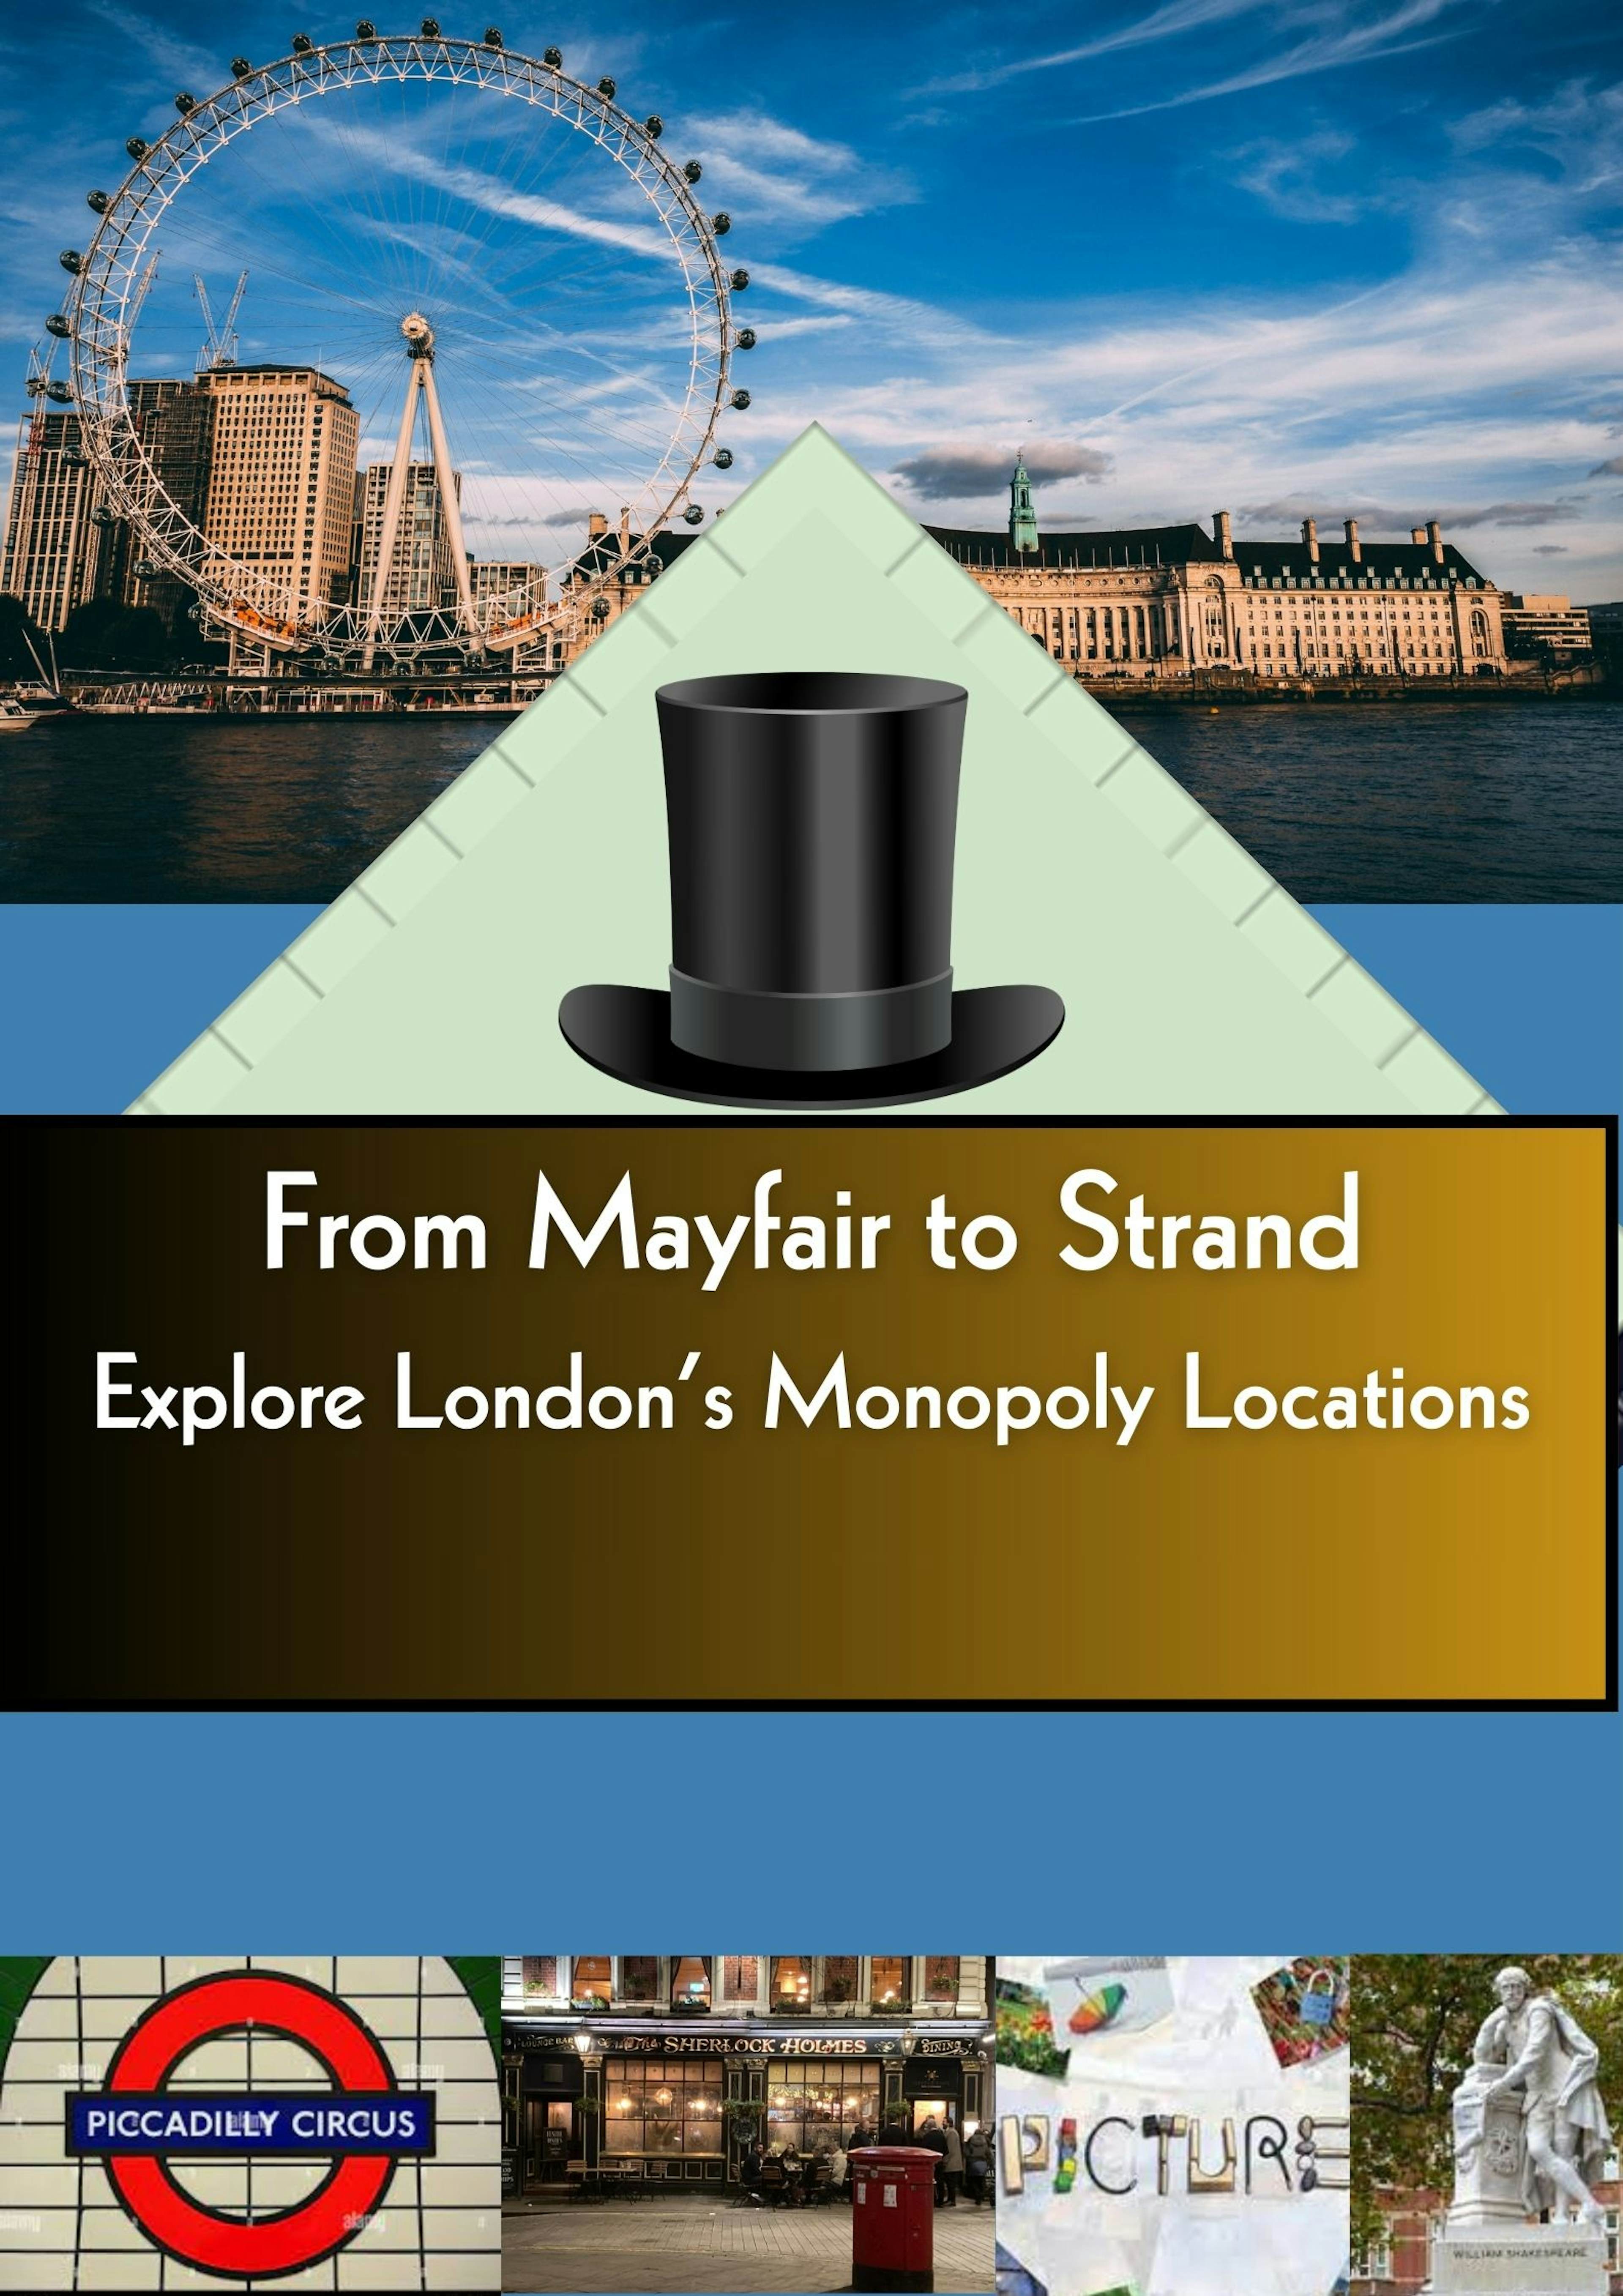 From Mayfair to Strand: walk London's Monopoly board